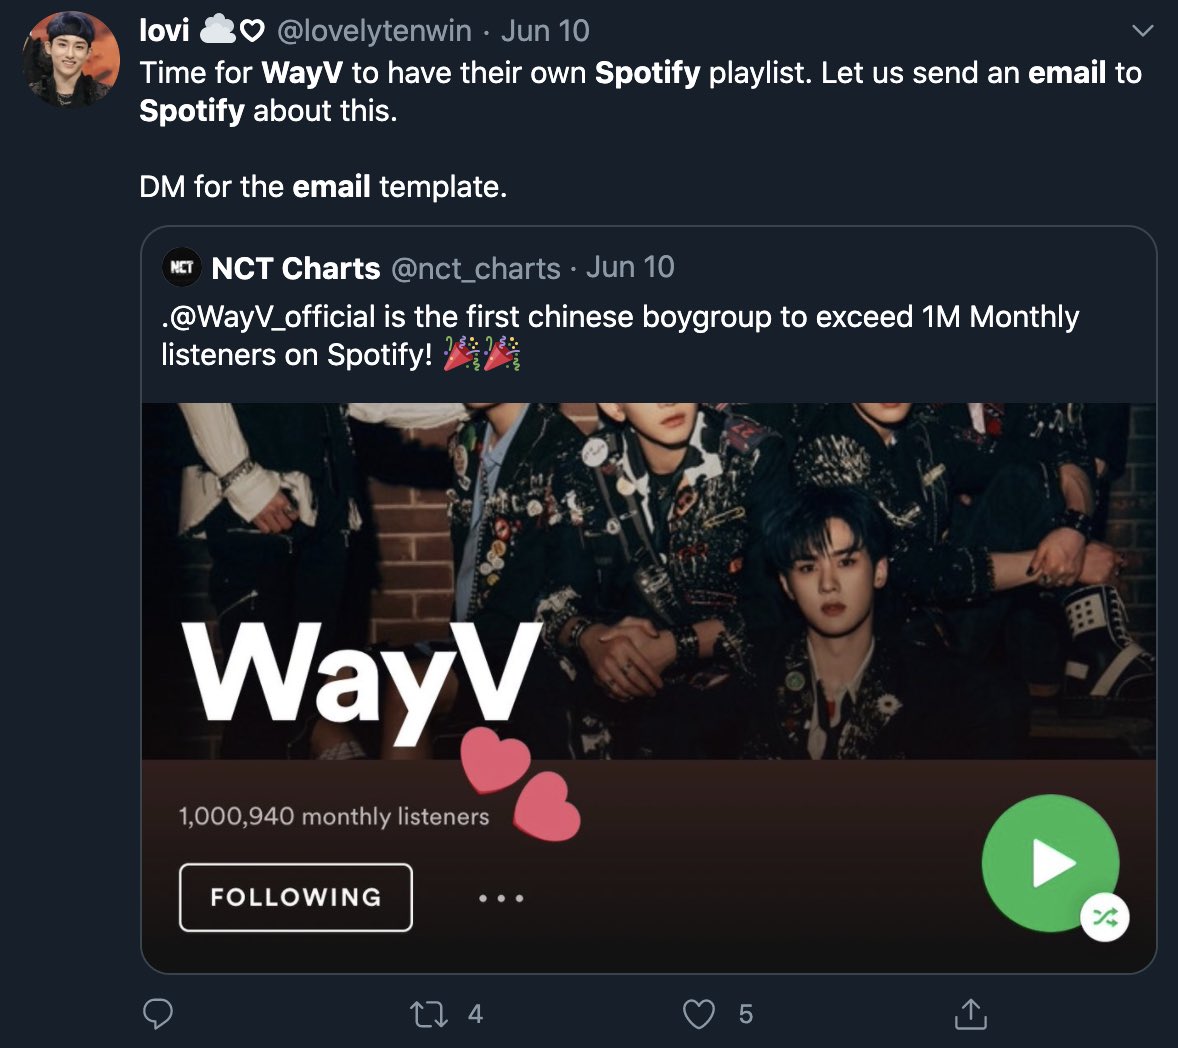 WayV was likely added to the NCT playlist this year because SM has been moving them back into the NCT brand now that China-Korea relations are starting to settle. It’s ok to request a playlist for WayV as well, but they also demanded they be removed from the NCT playlist